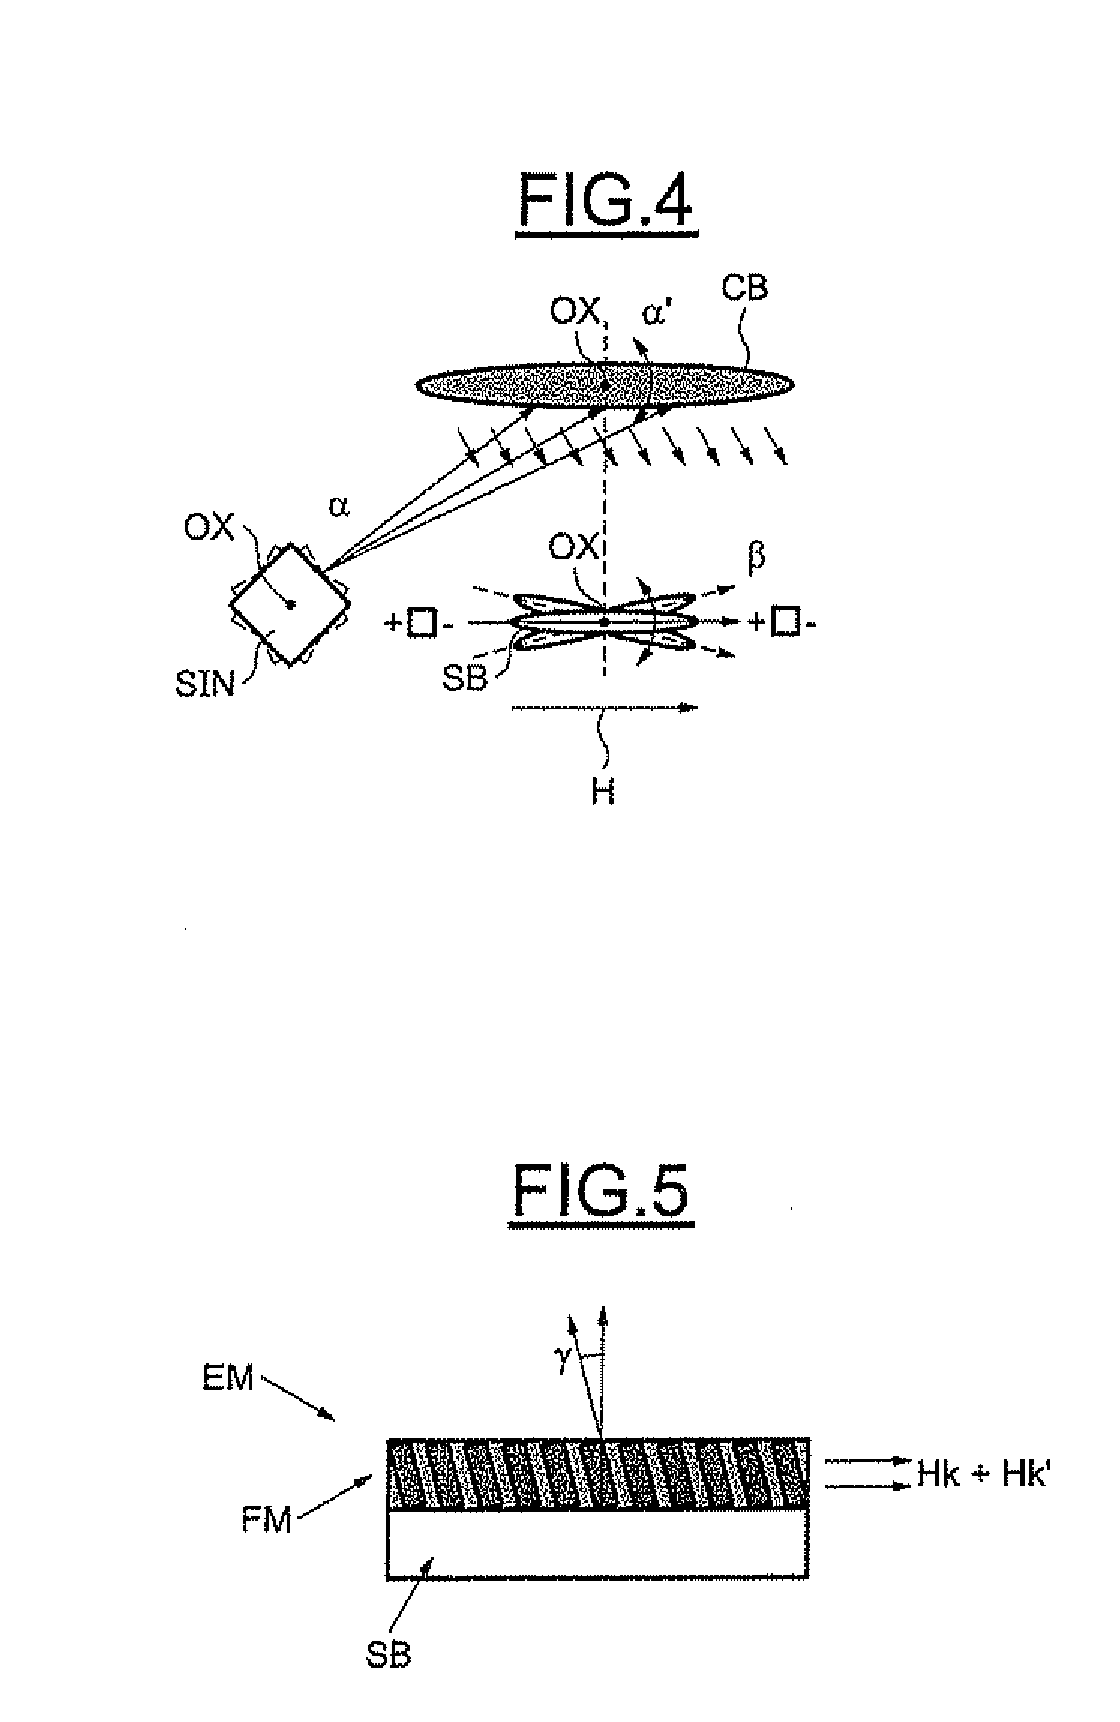 Radio Frequency Device with Magnetic Element, Method for Making Such a Magnetic Element